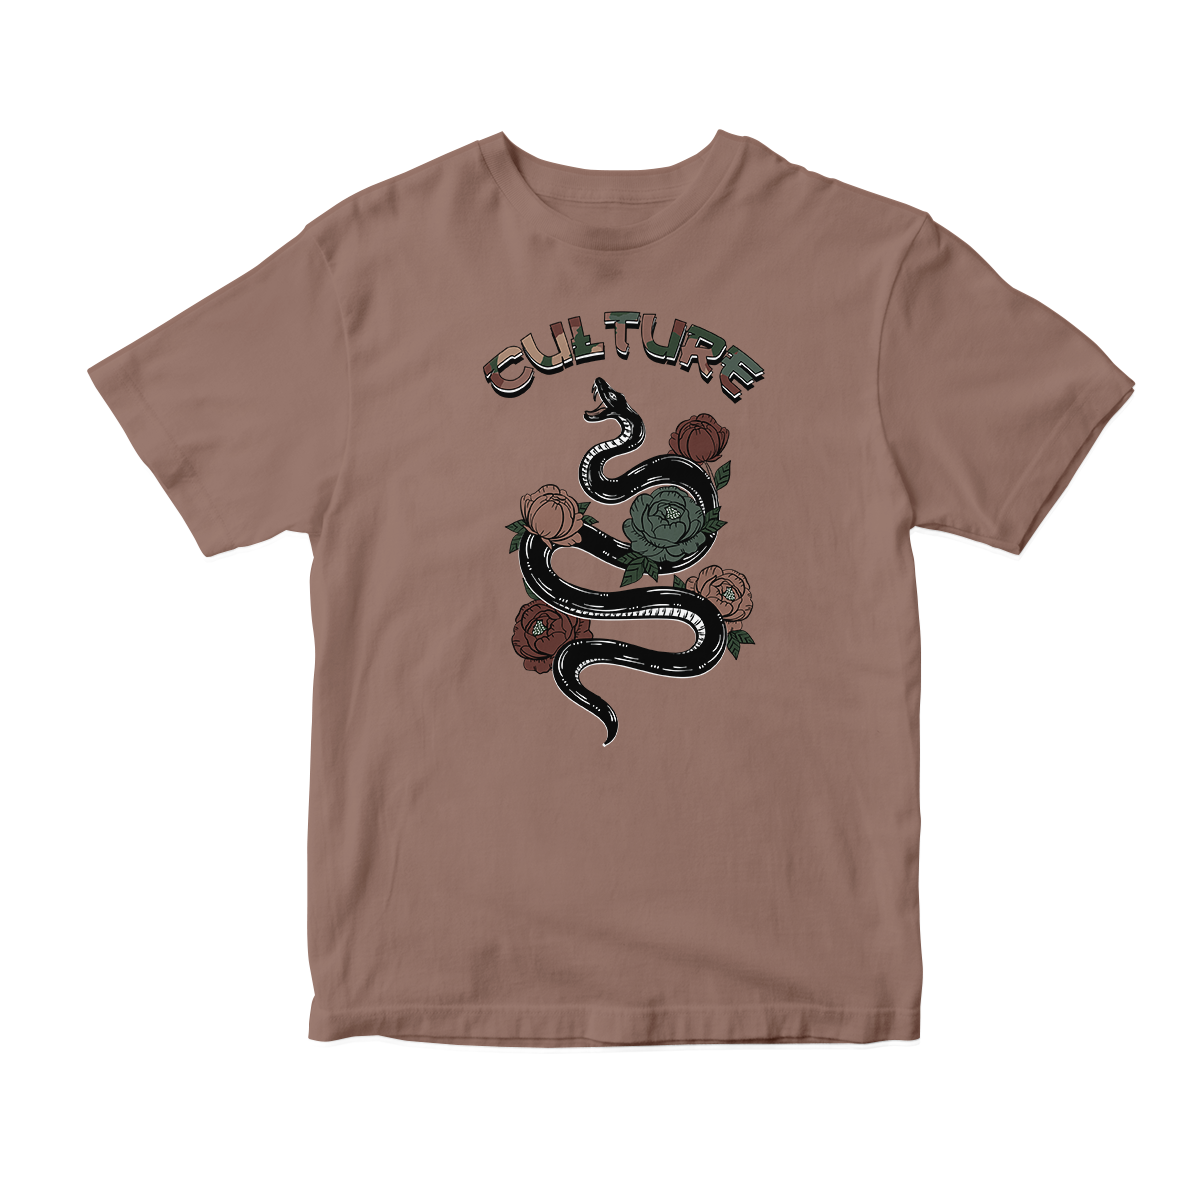 'Culture Snake' in Woodland CW Short Sleeve Tee